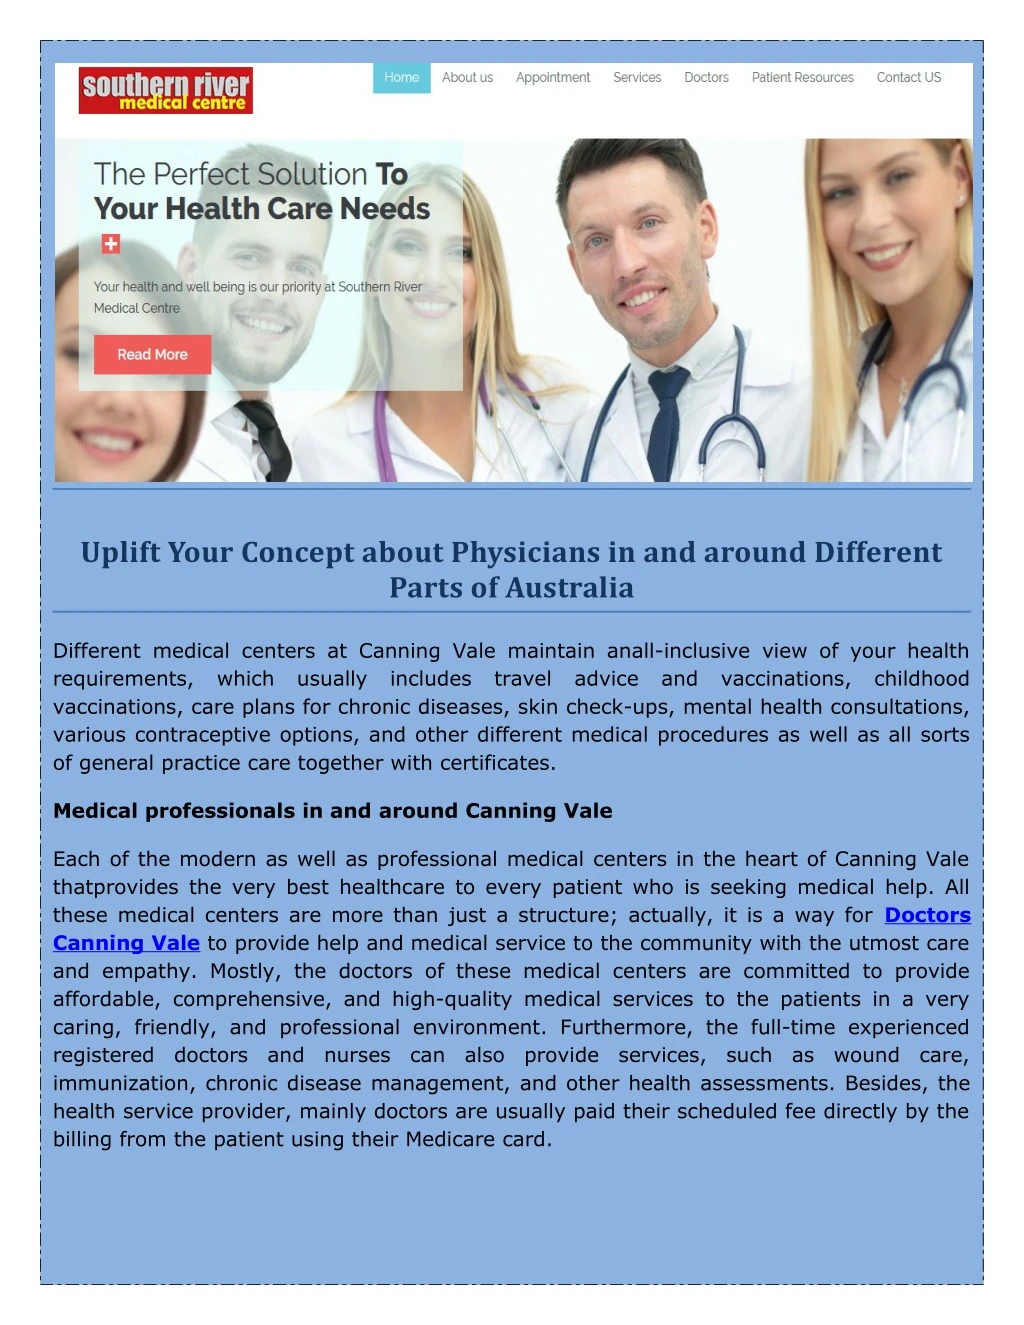 uplift your concept about physicians